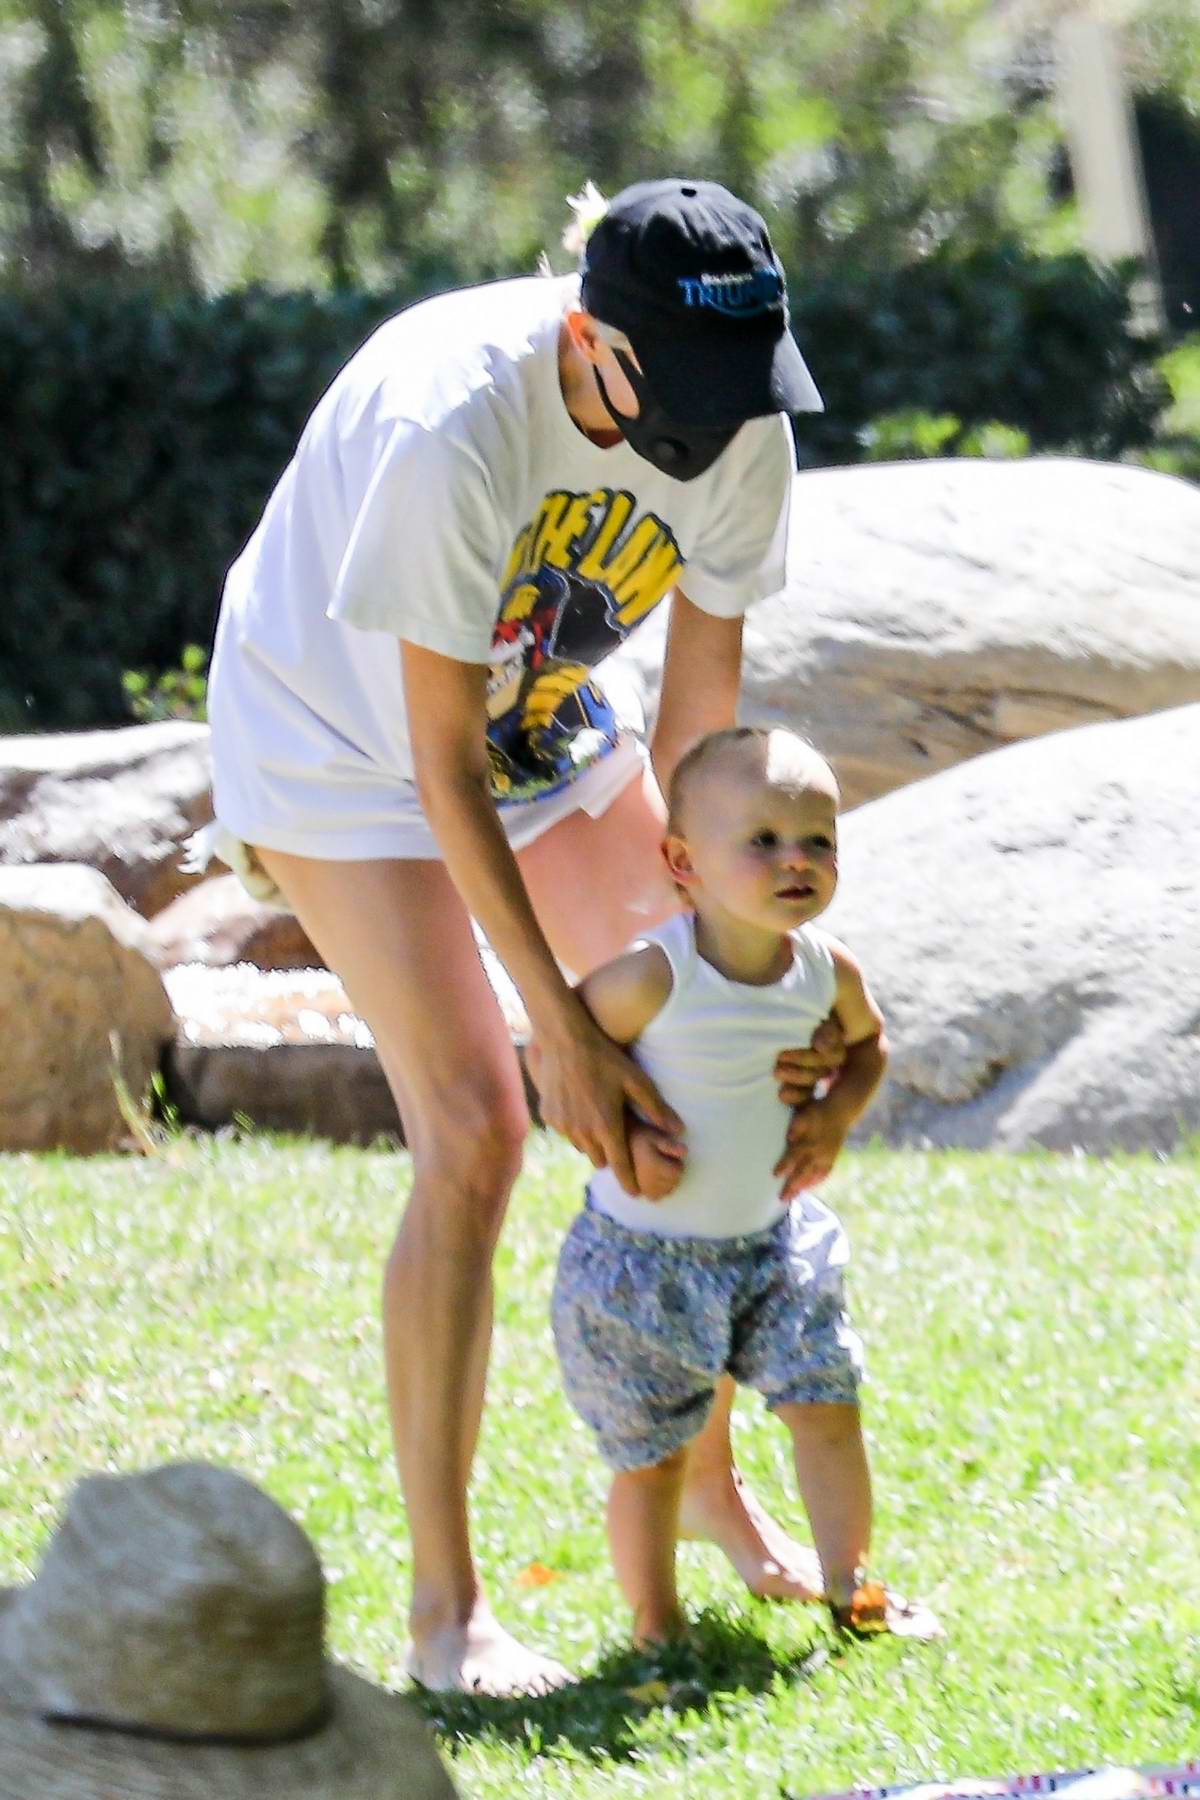 diane kruger and norman reedus enjoy a day with their daughter at the park  in beverly hills, california-140620_7